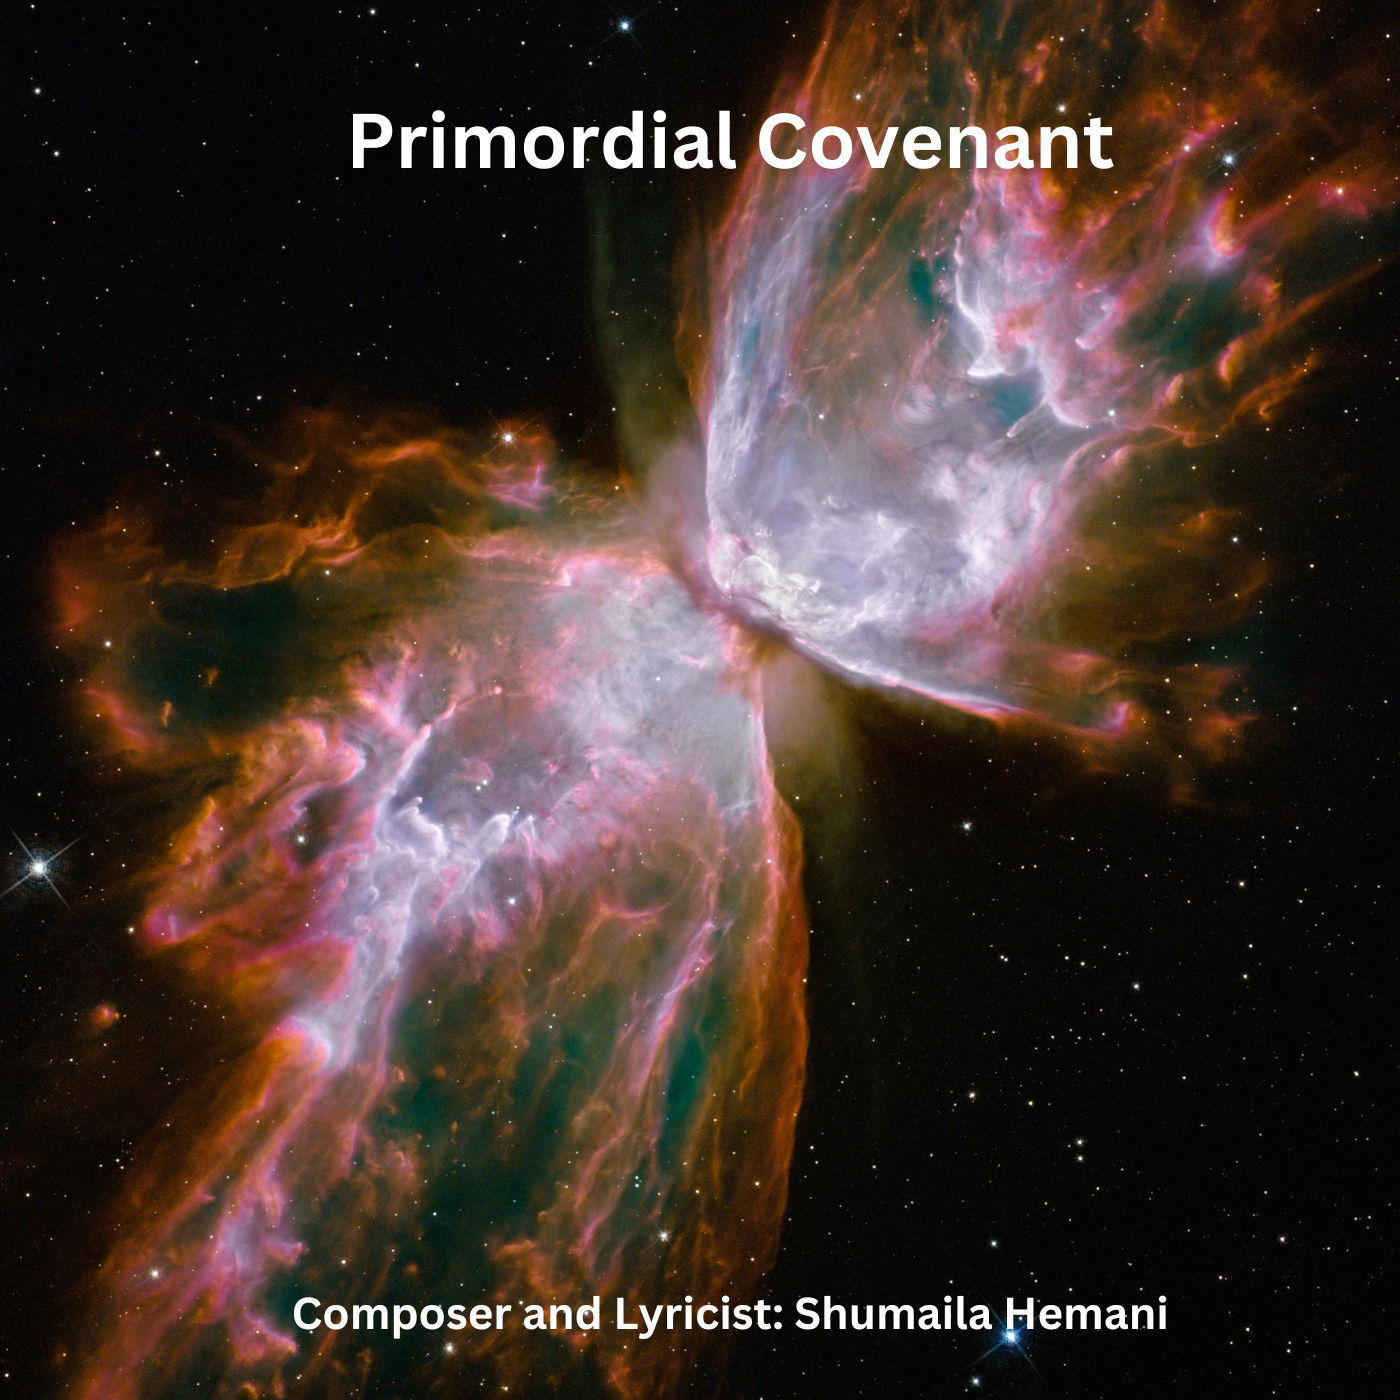 Women In Music Honour Roll 2023 Recipient, Shumaila Hemani, Ph.D. Releases “Primordial Covenant” Dedicated To Peace And Justice